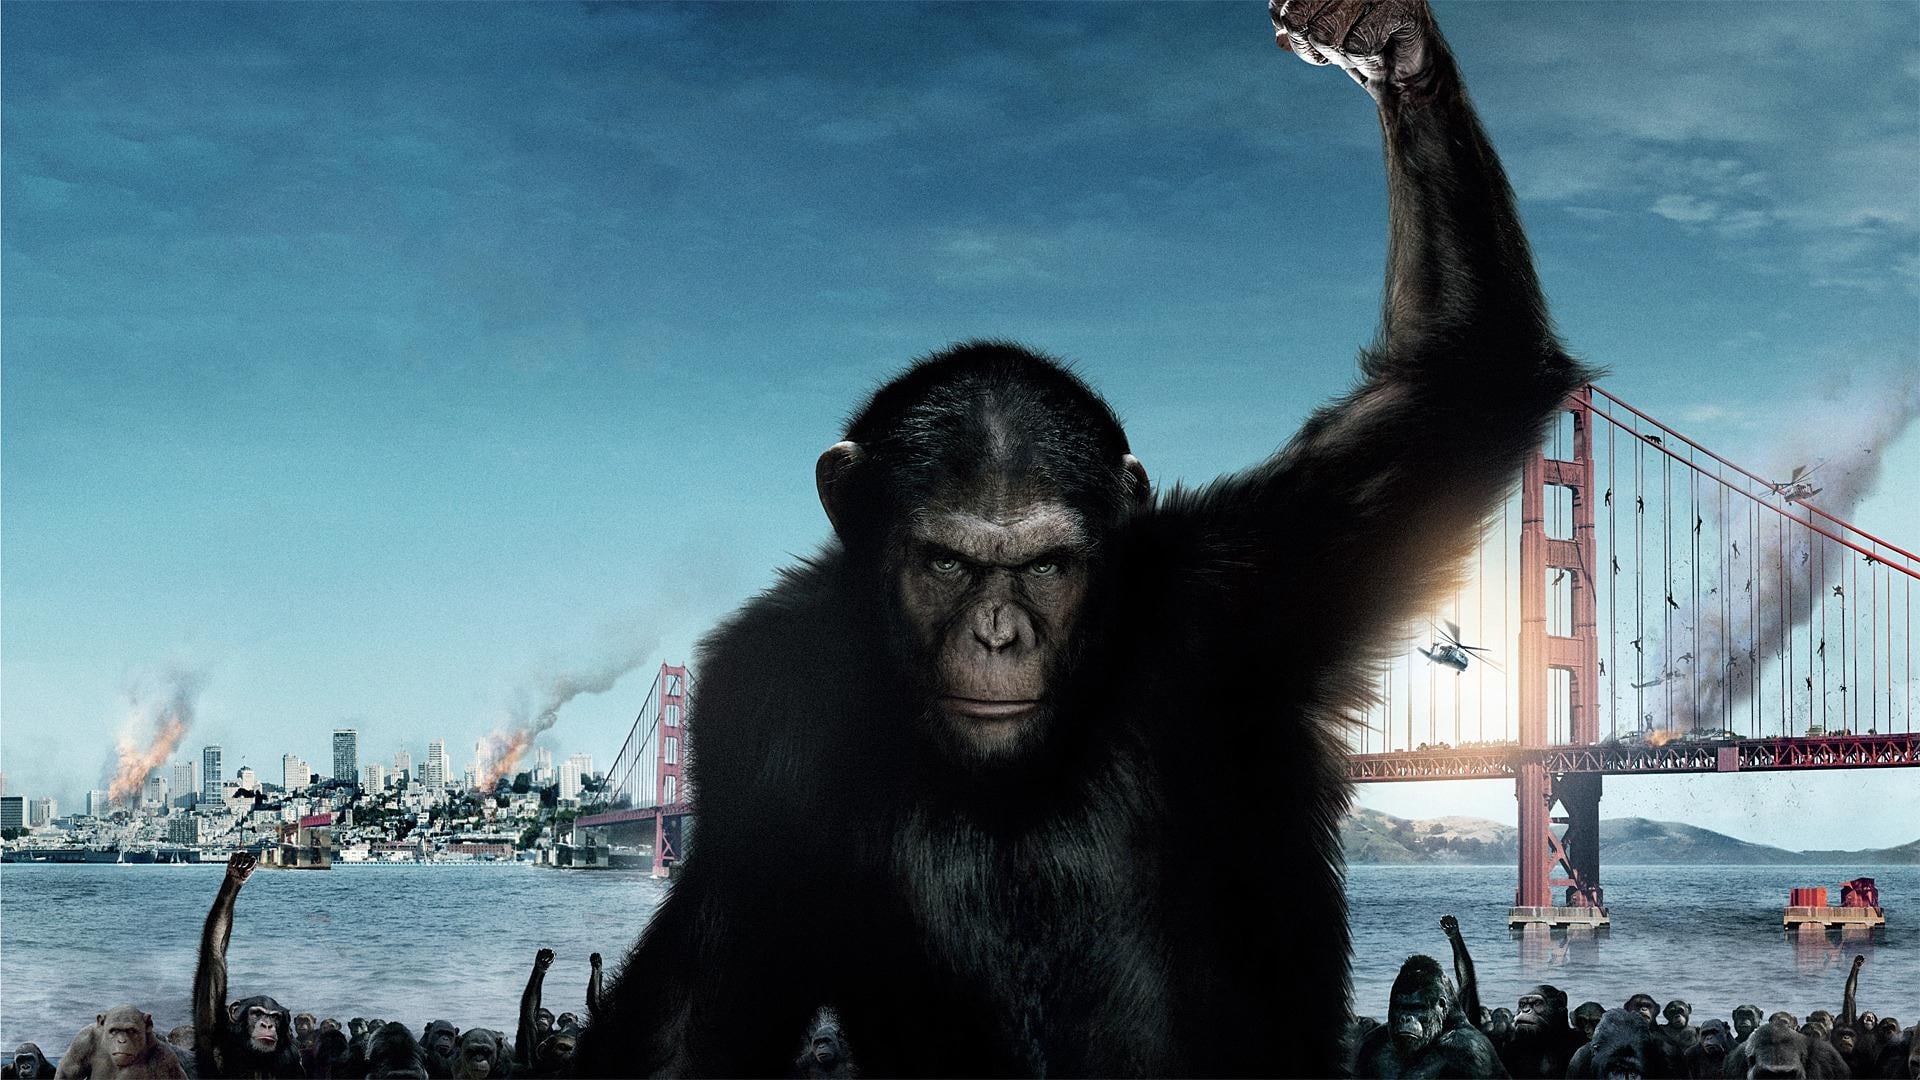 Tapeta filmu Zrození Planety opic / Rise of the Planet of the Apes (2011)